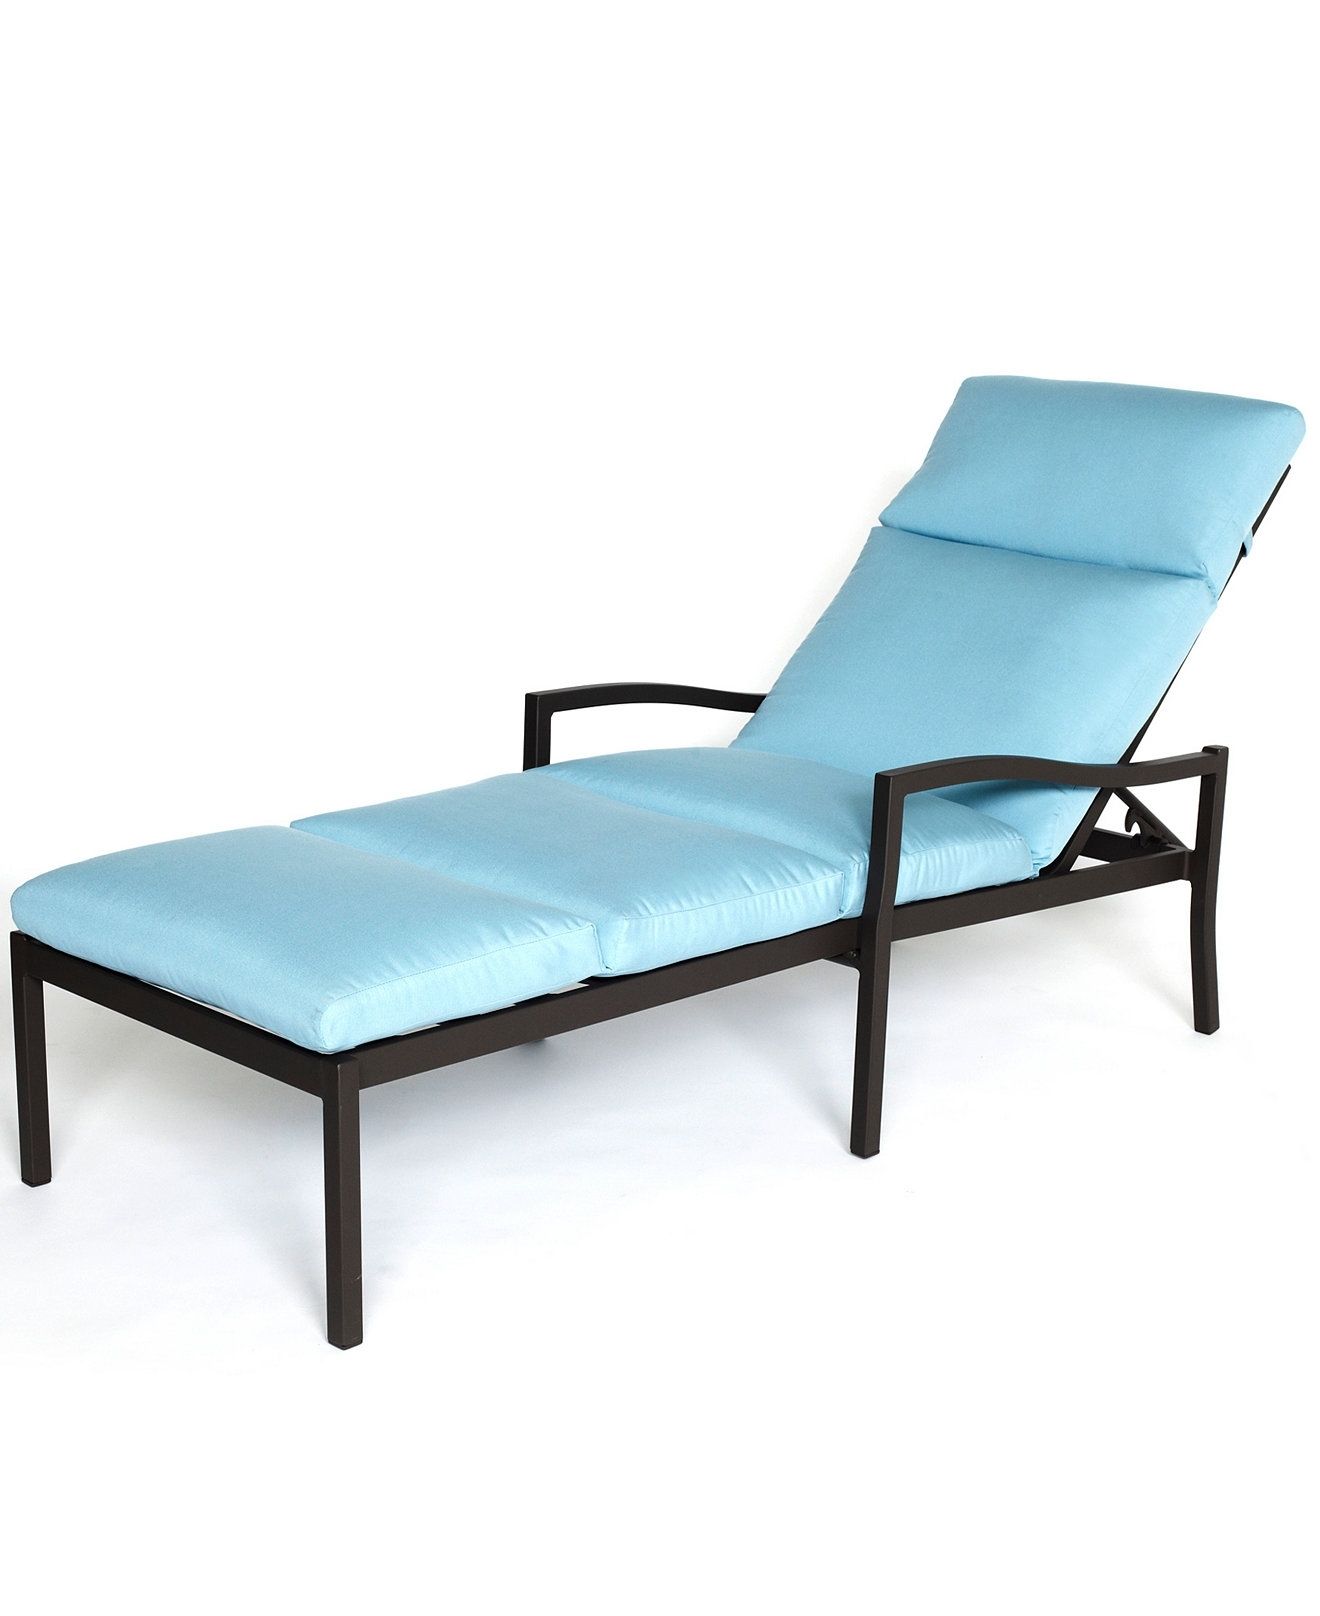 Holden Aluminum Patio Furniture, Outdoor Chaise Lounge – Outdoor In Latest Macys Outdoor Chaise Lounge Chairs (View 9 of 15)